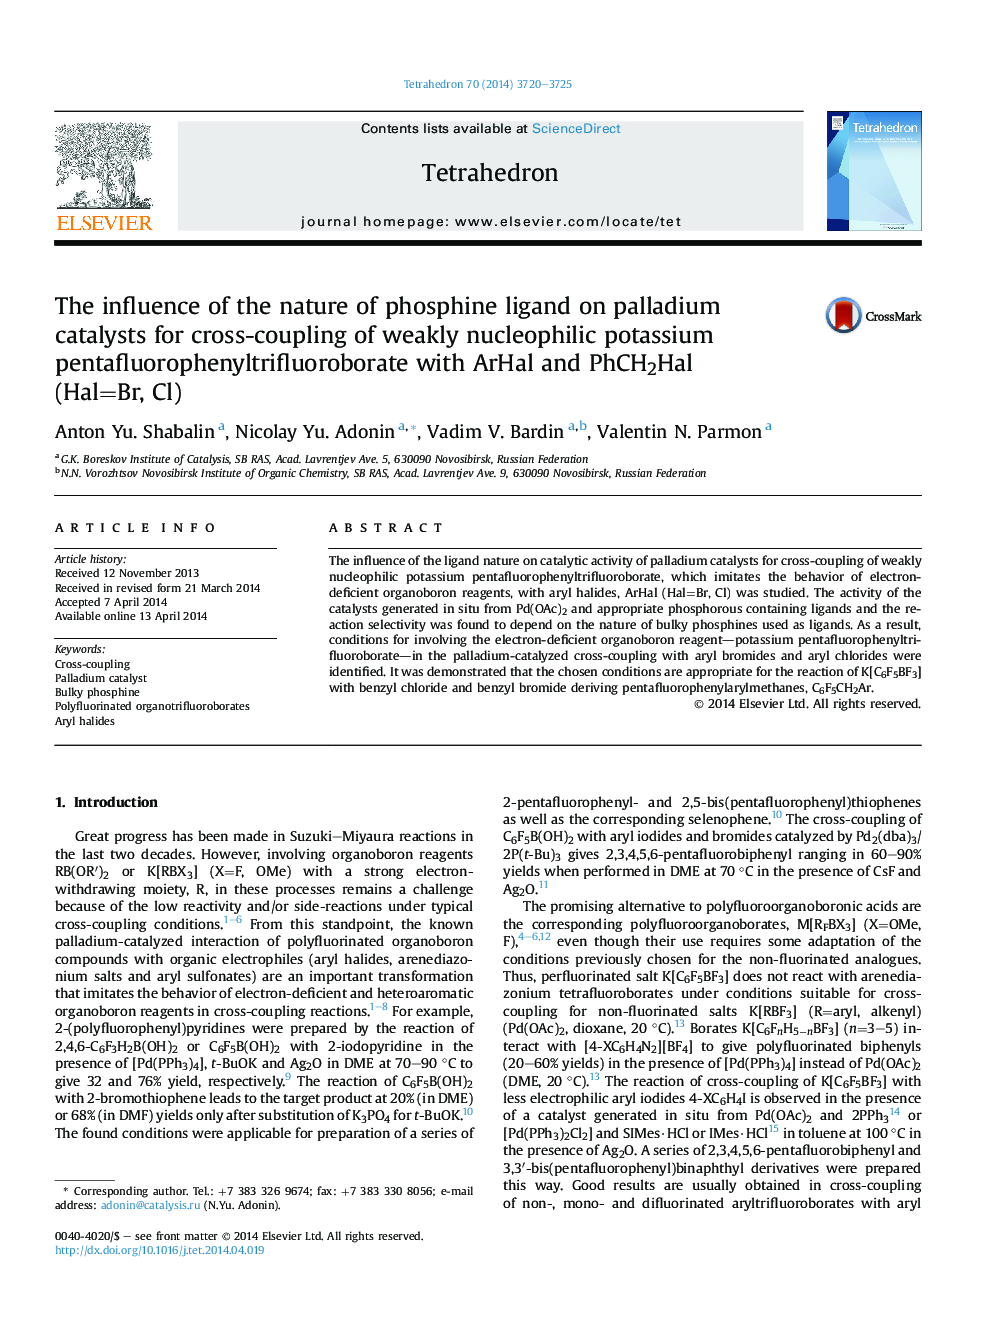 The influence of the nature of phosphine ligand on palladium catalysts for cross-coupling of weakly nucleophilic potassium pentafluorophenyltrifluoroborate with ArHal and PhCH2Hal (Hal=Br, Cl)